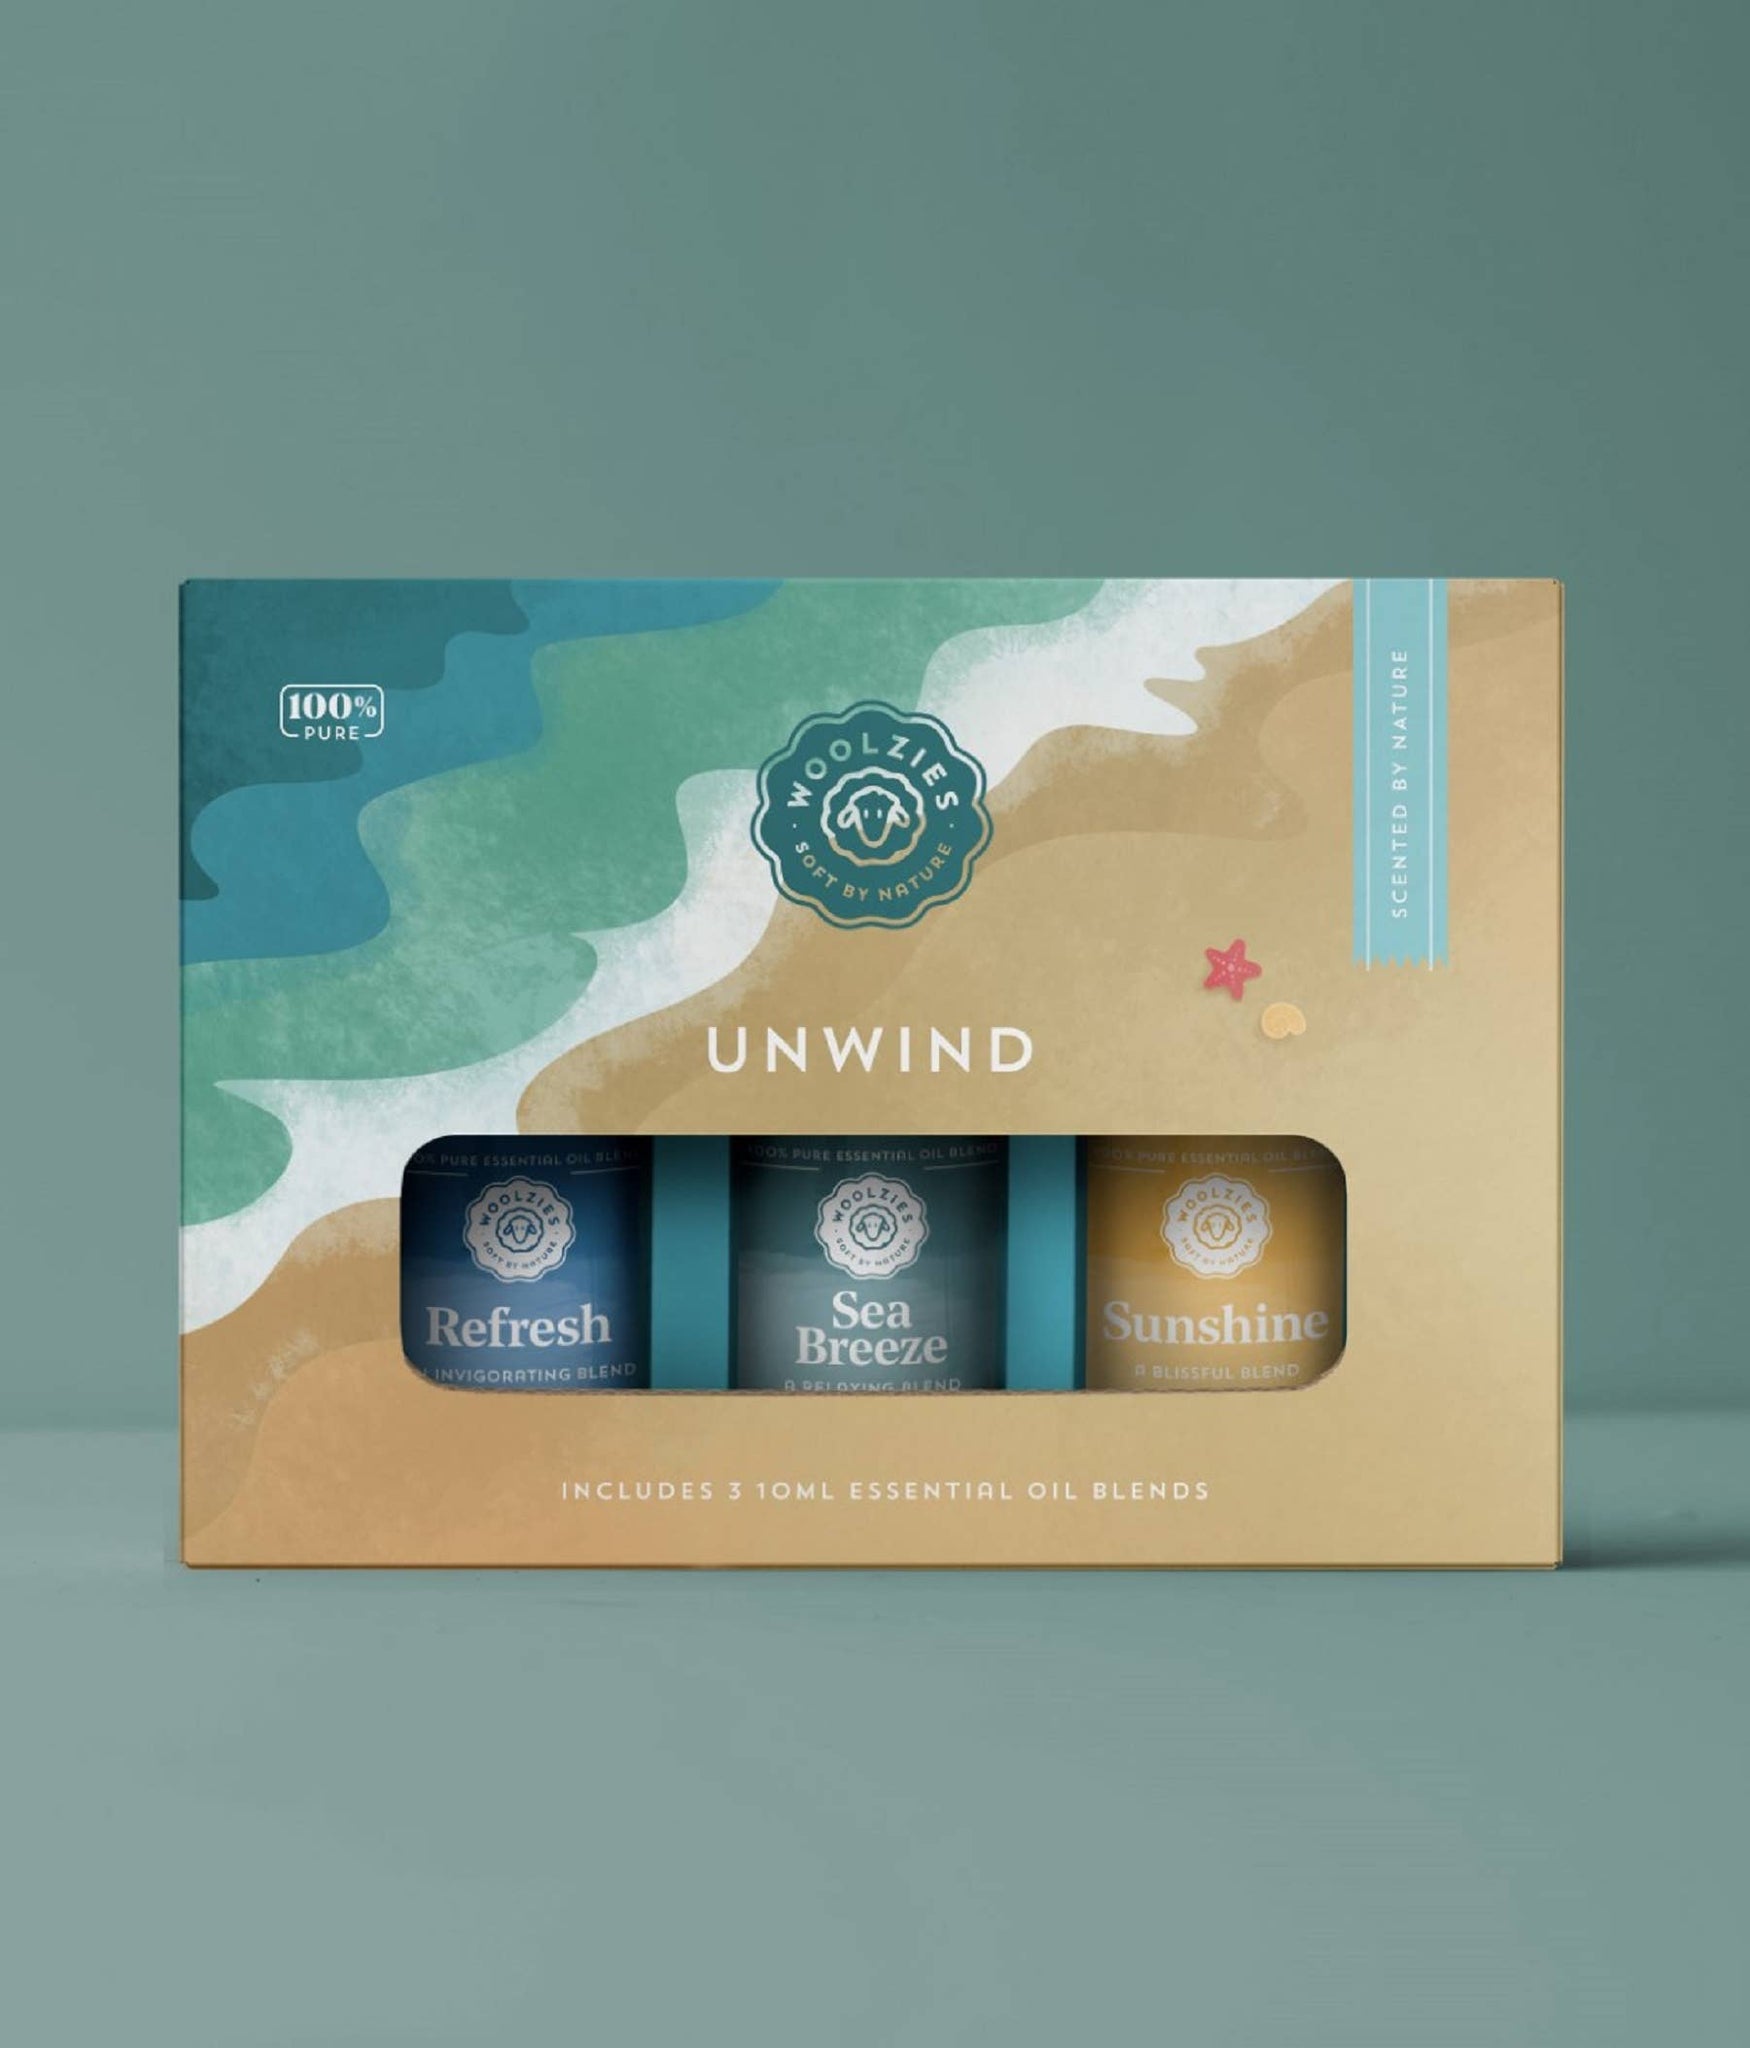 The Unwind Essential Oil Collection